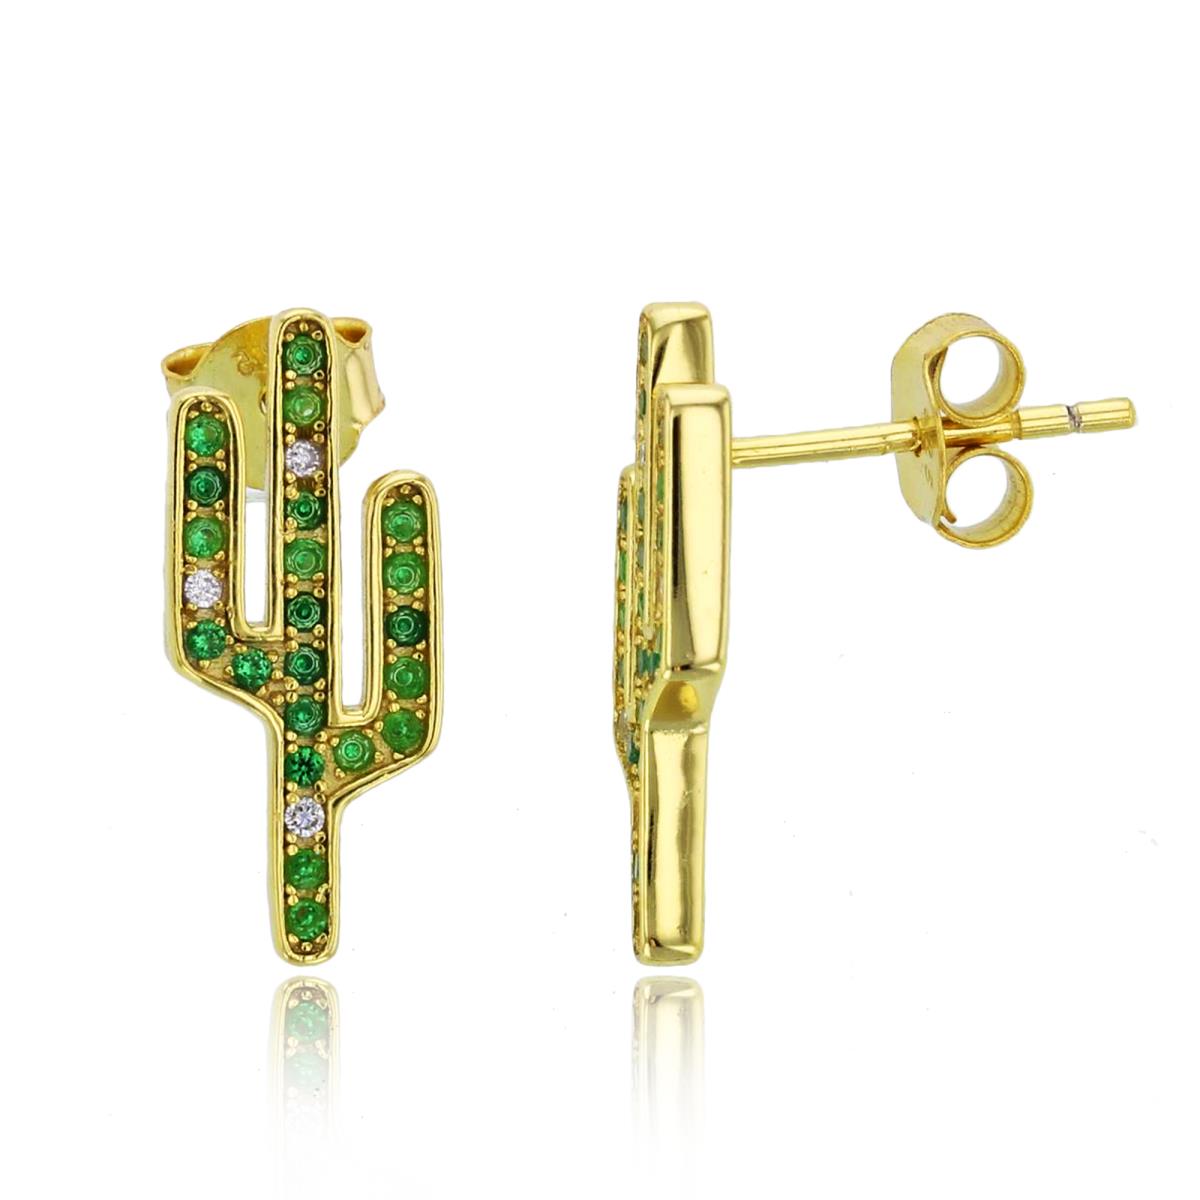 Sterling Silver Yellow Rnd White & Emerald CZ "Cactus"Stud Earrings